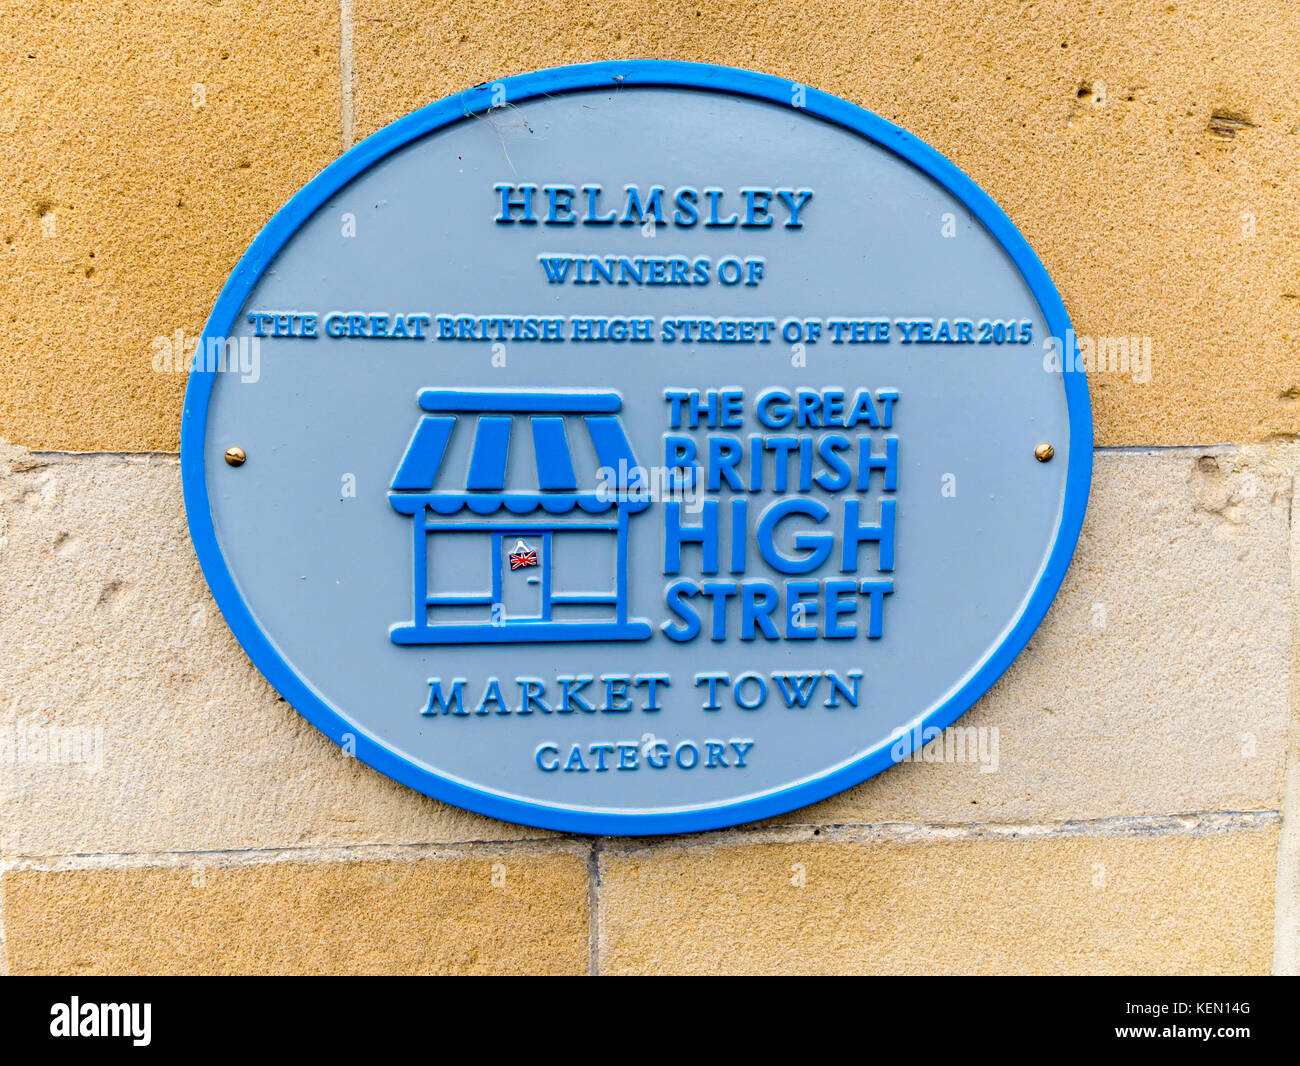 Blue Plaque for Helmsley Winner of the Great British High Street of the Year 2015 Market Town Category Stock Photo